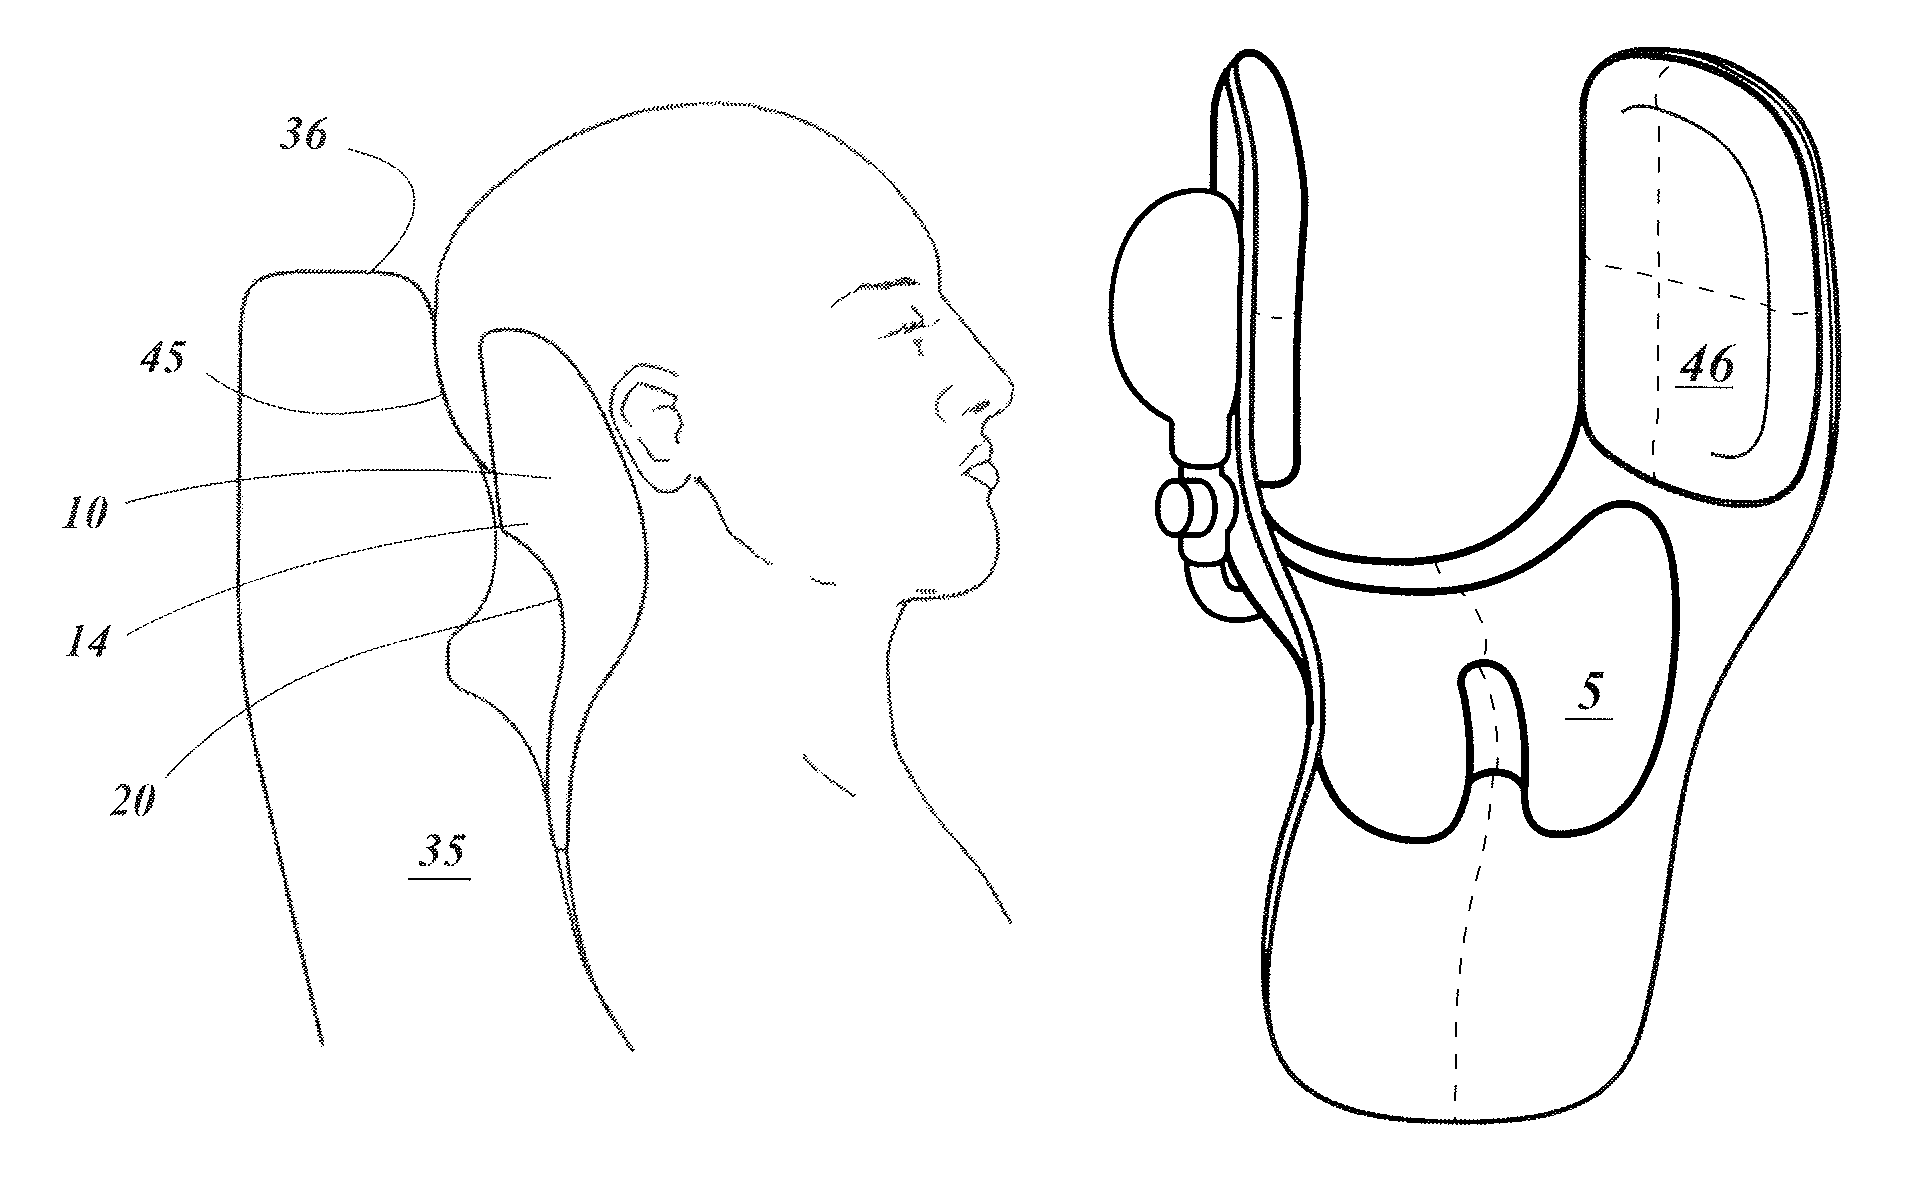 Travel pillow providing head and neck alignment during use